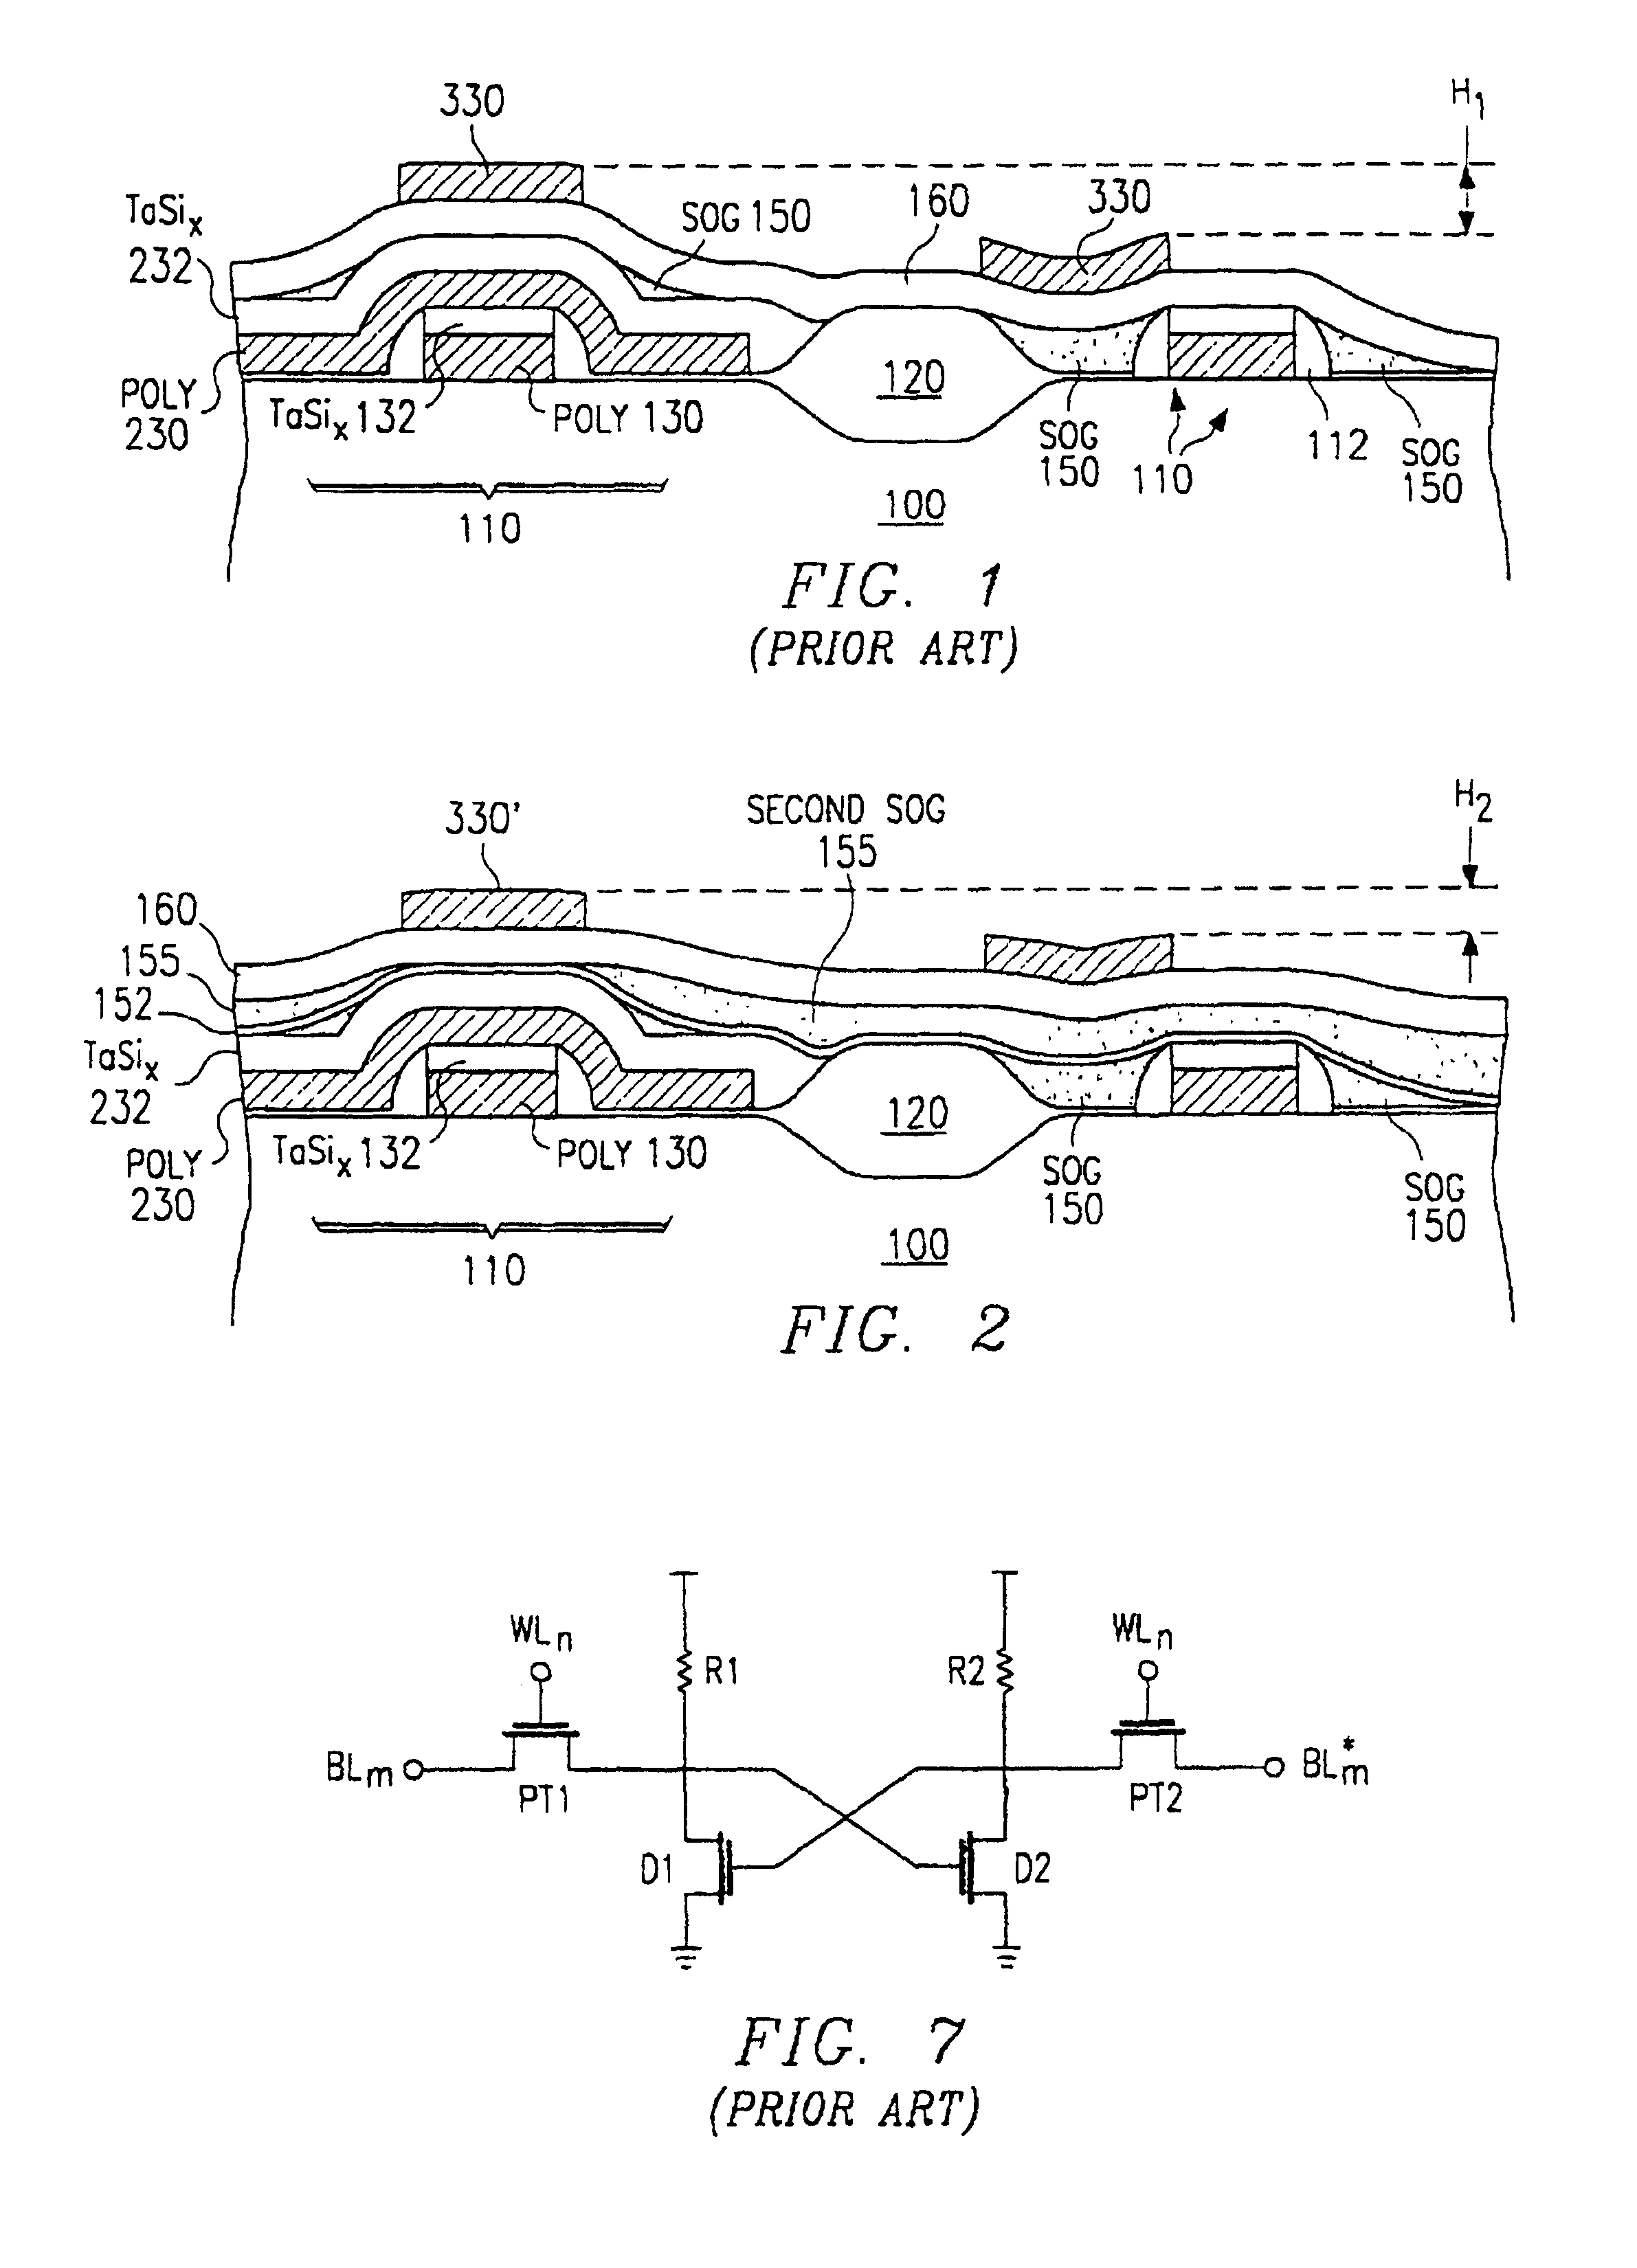 Sram cell fabrication with interlevel Dielectric planarization